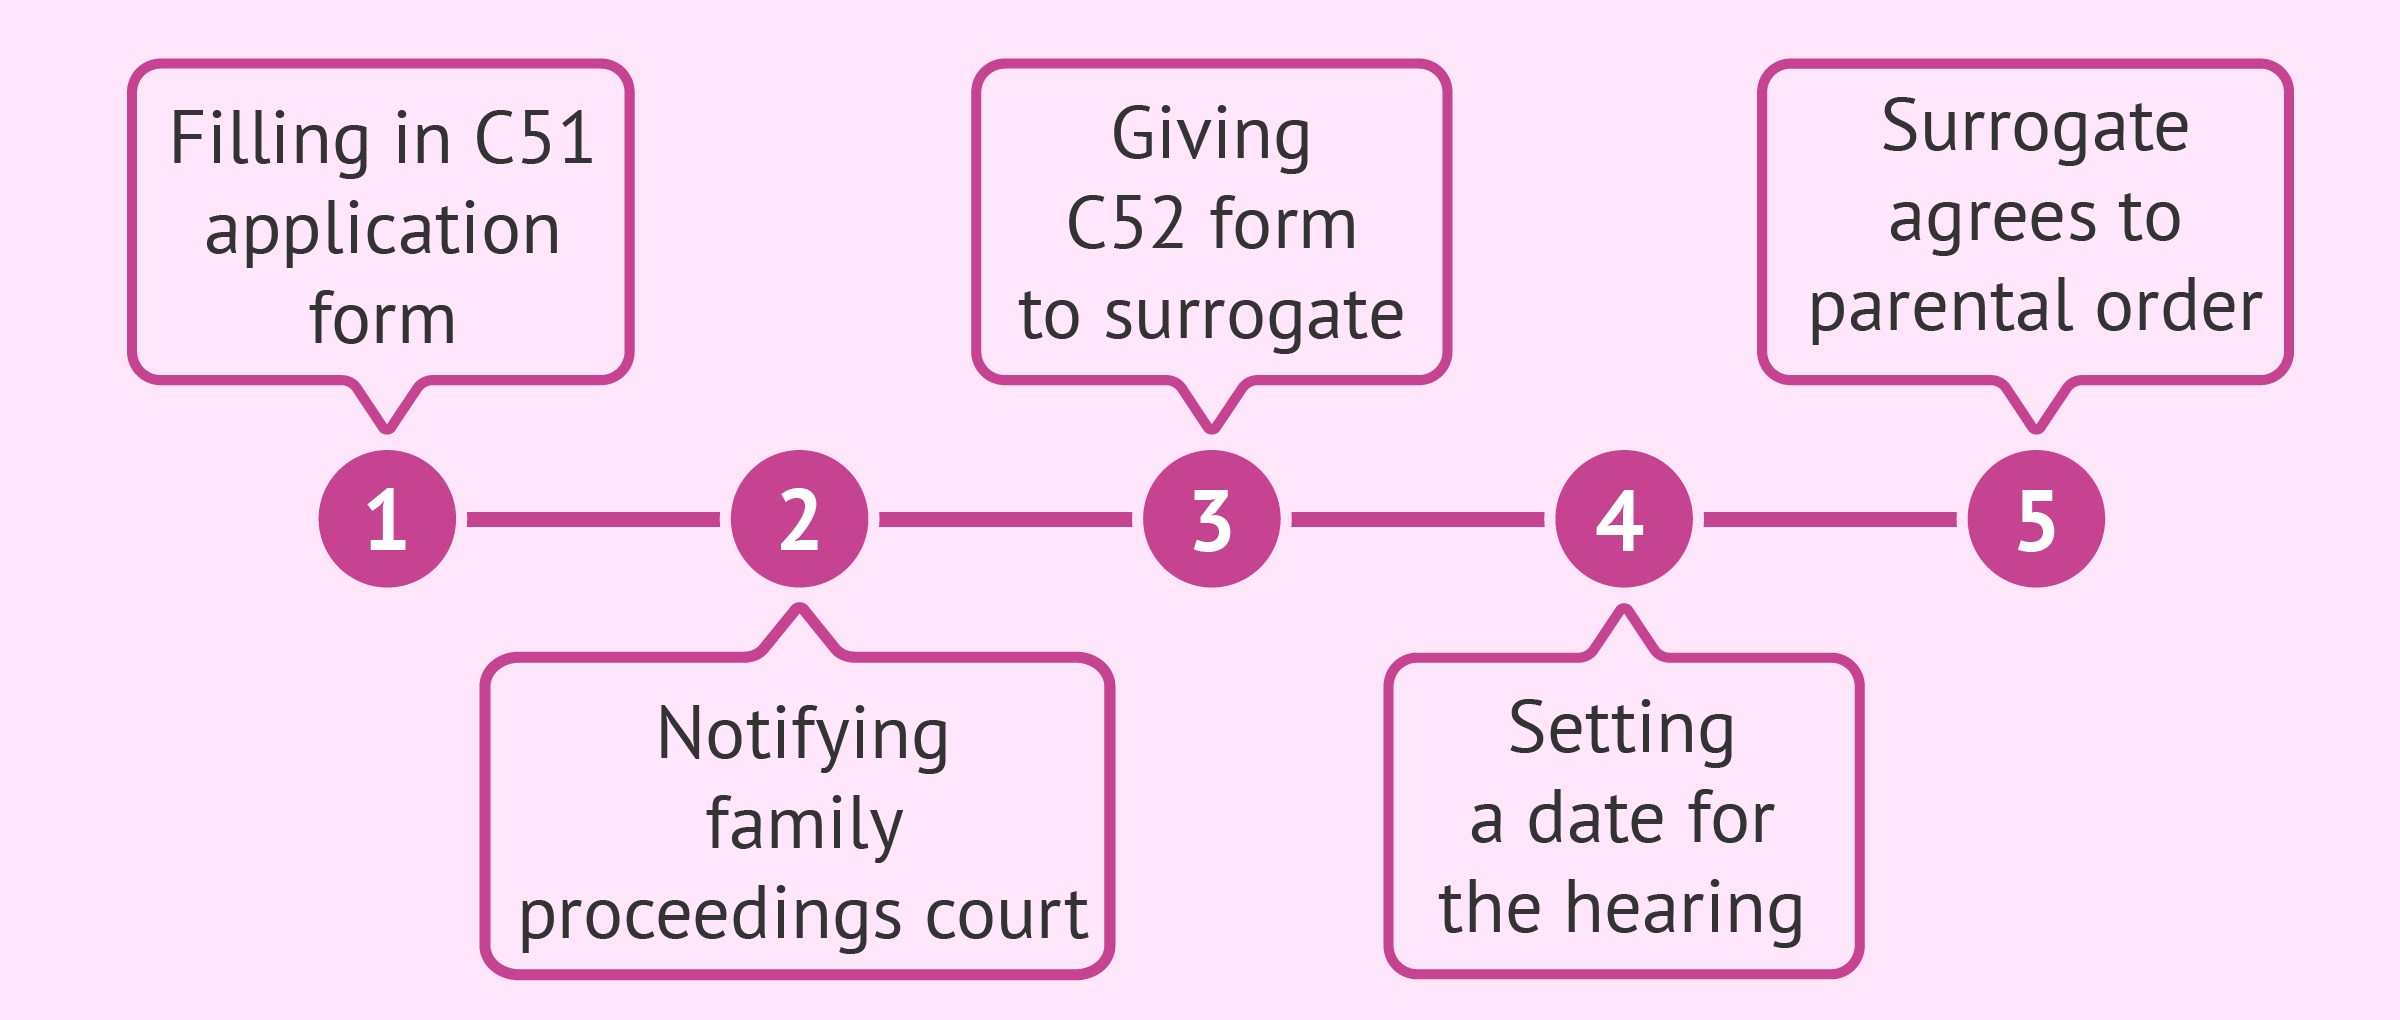 Surrogacy in the UK: legal process for intended parents